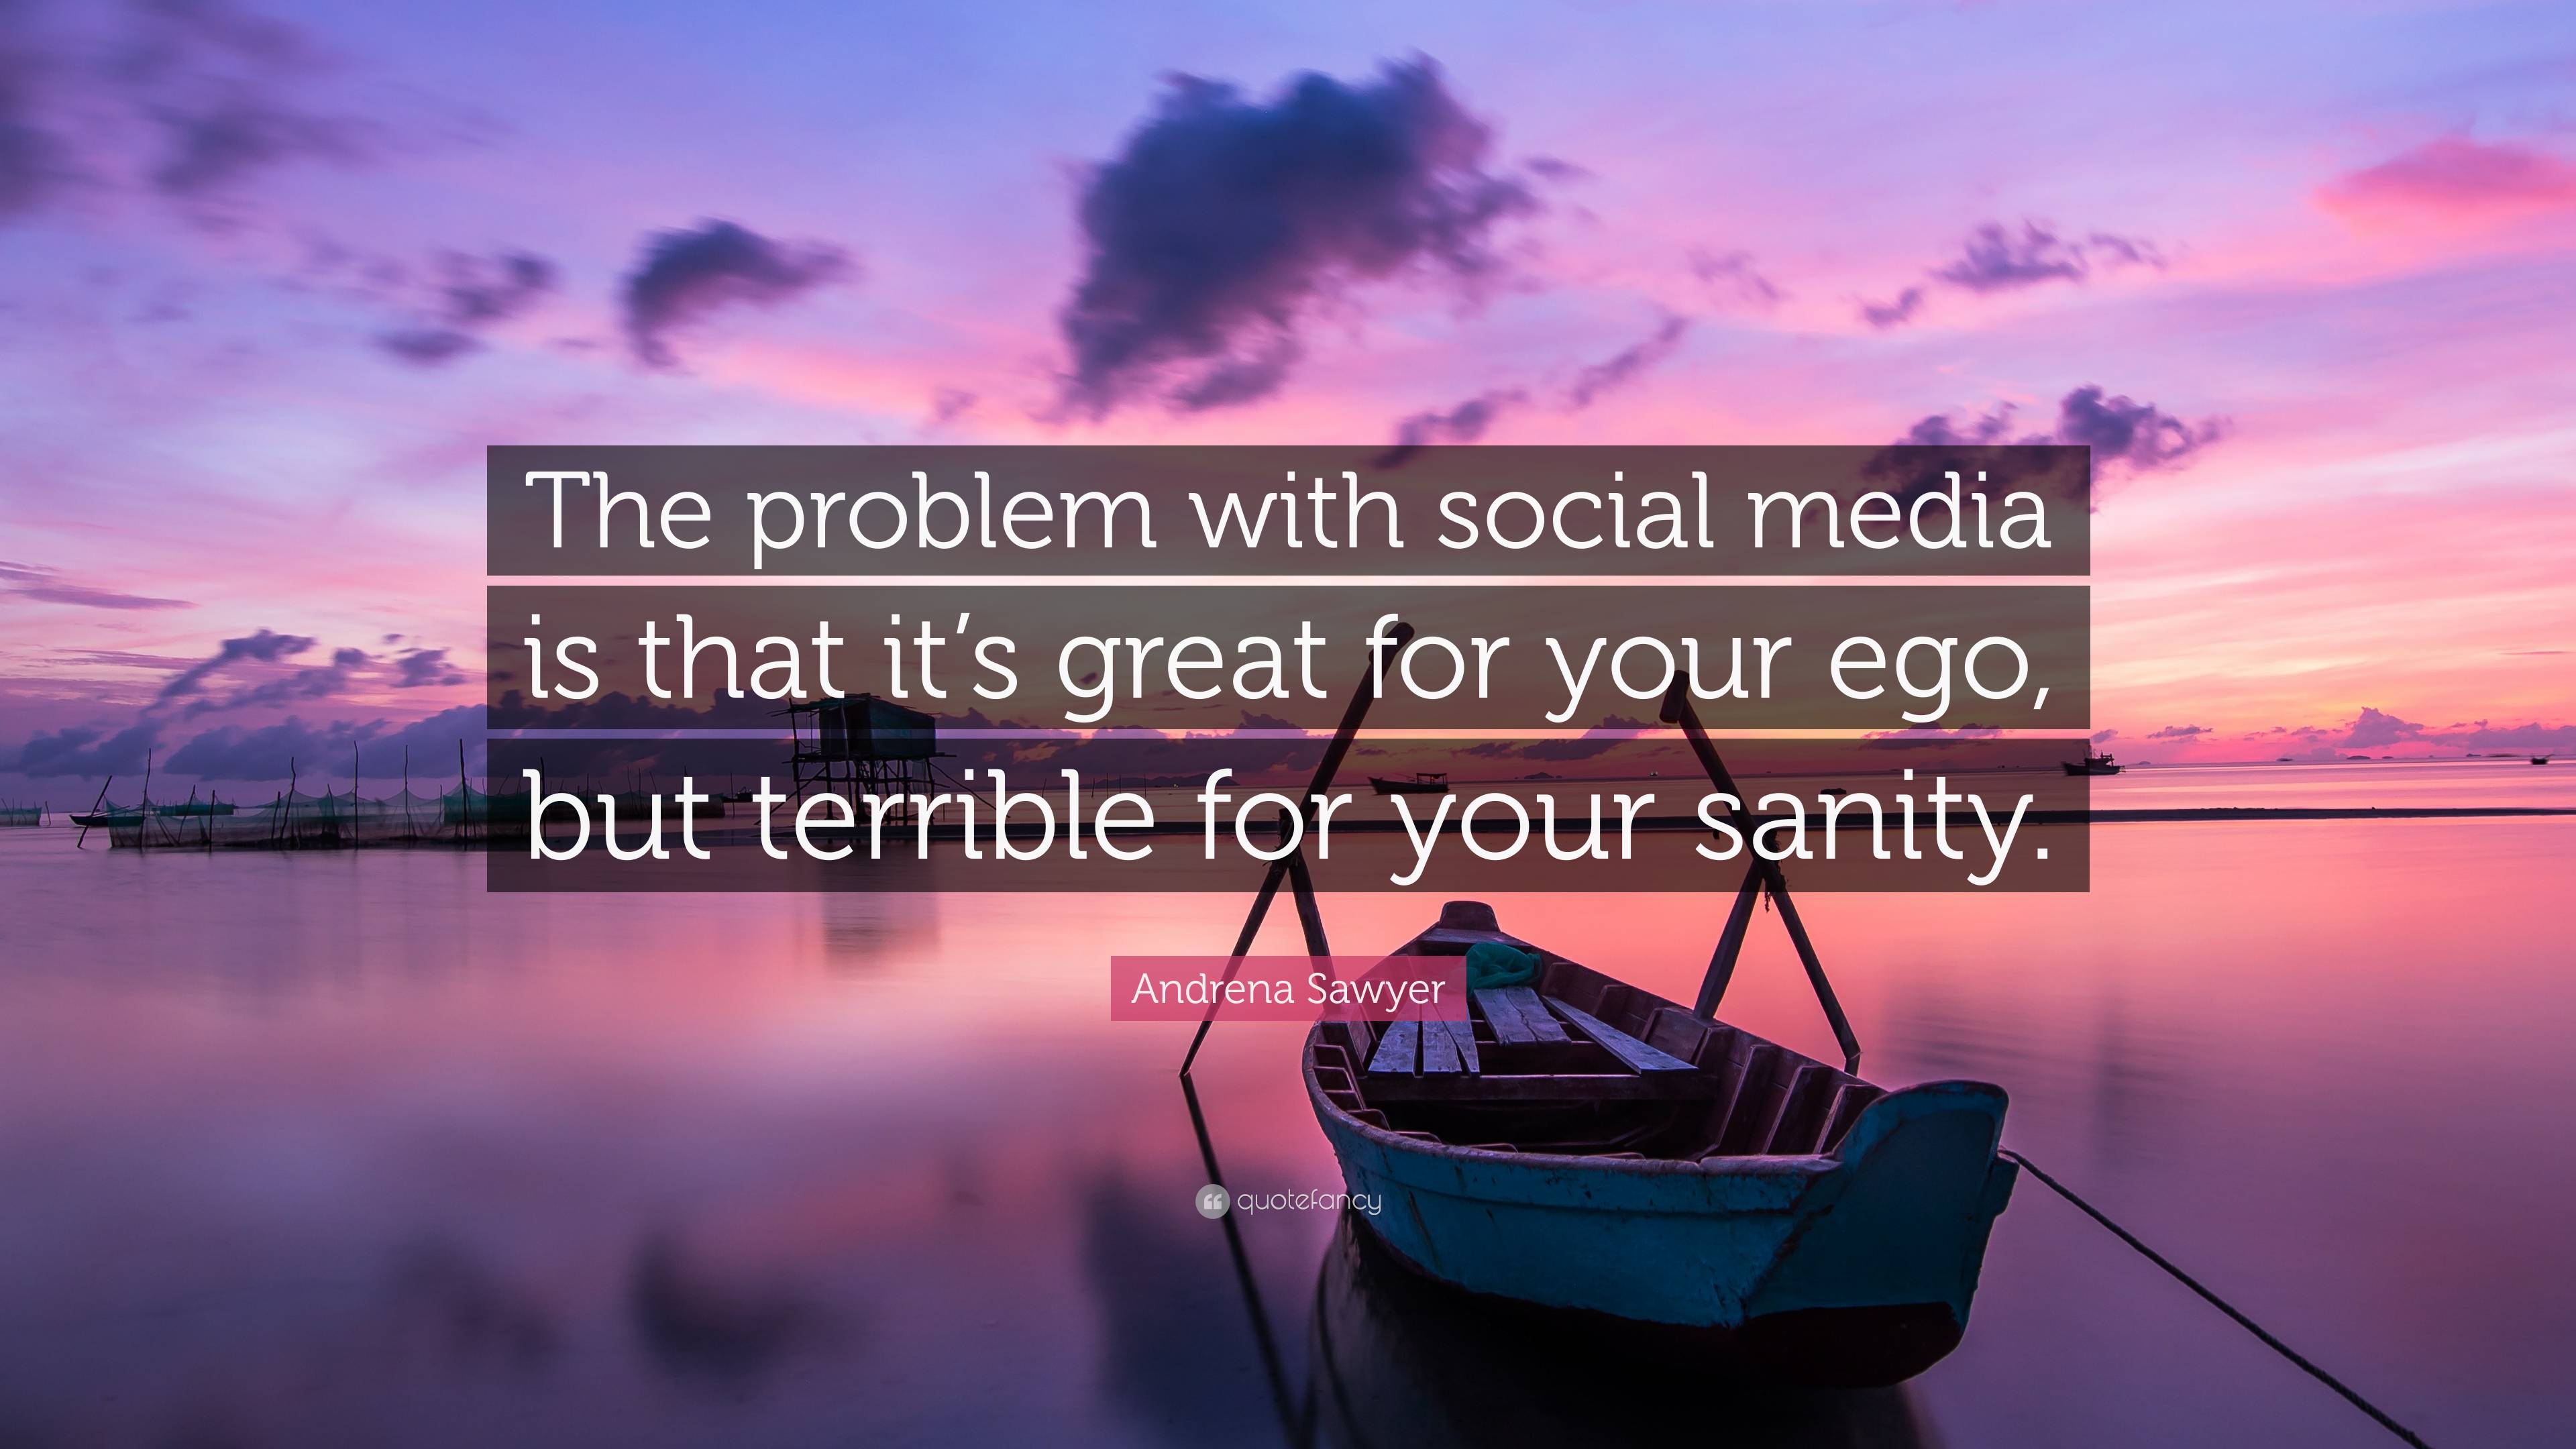 Andrena Sawyer Quote: “The problem with social media is that it's